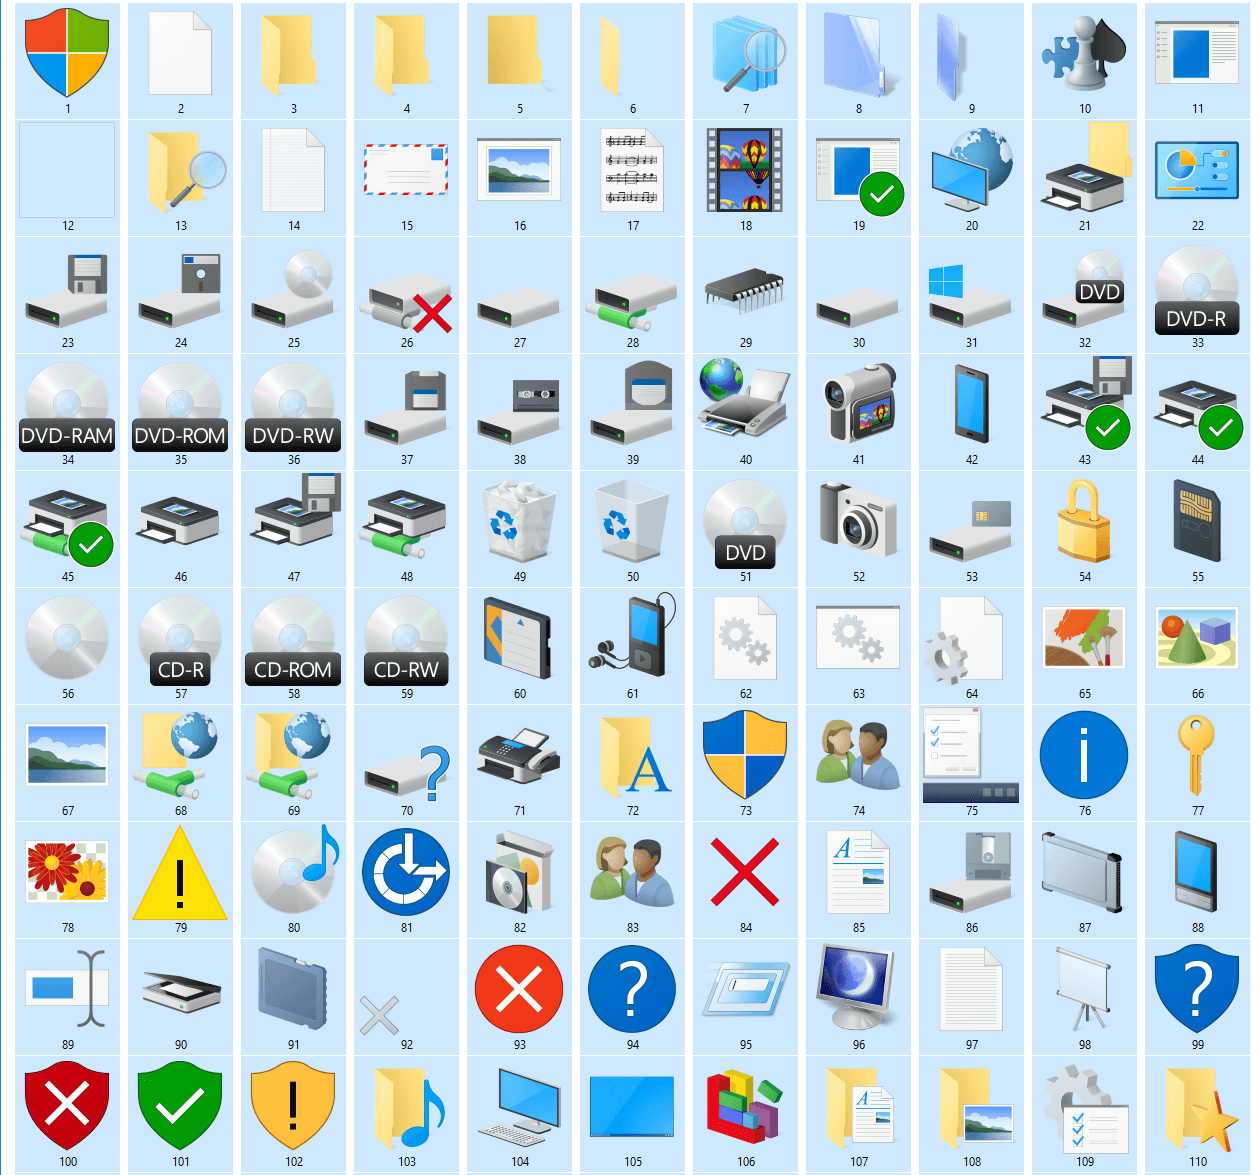 Windows 10 icons of imageres.dll (1/4)